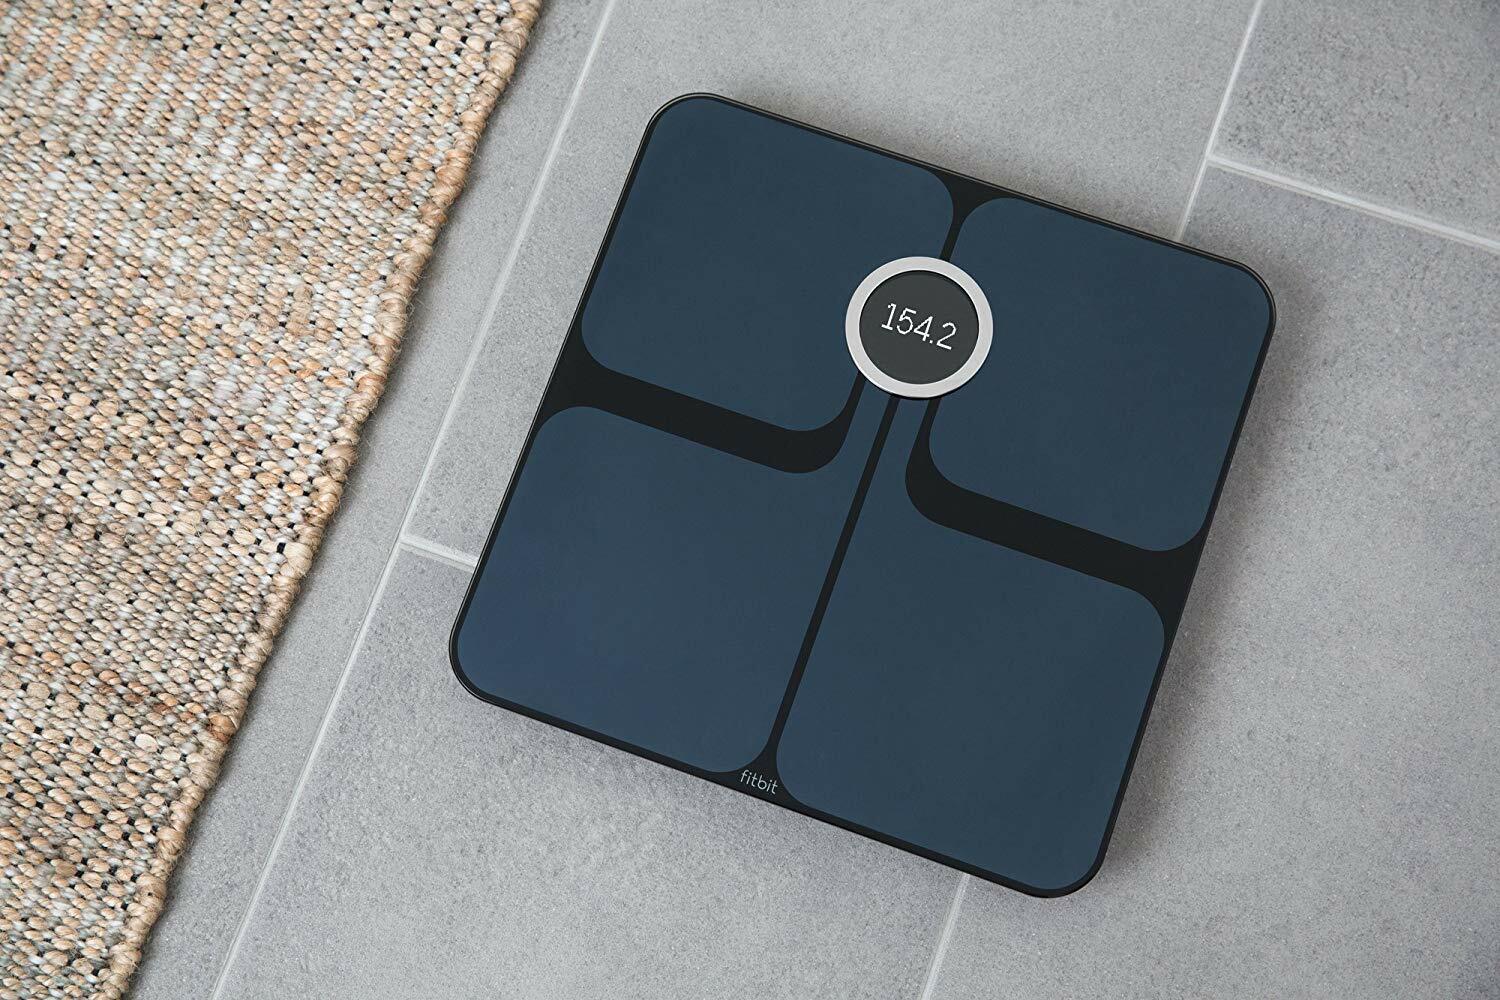 Smart scales